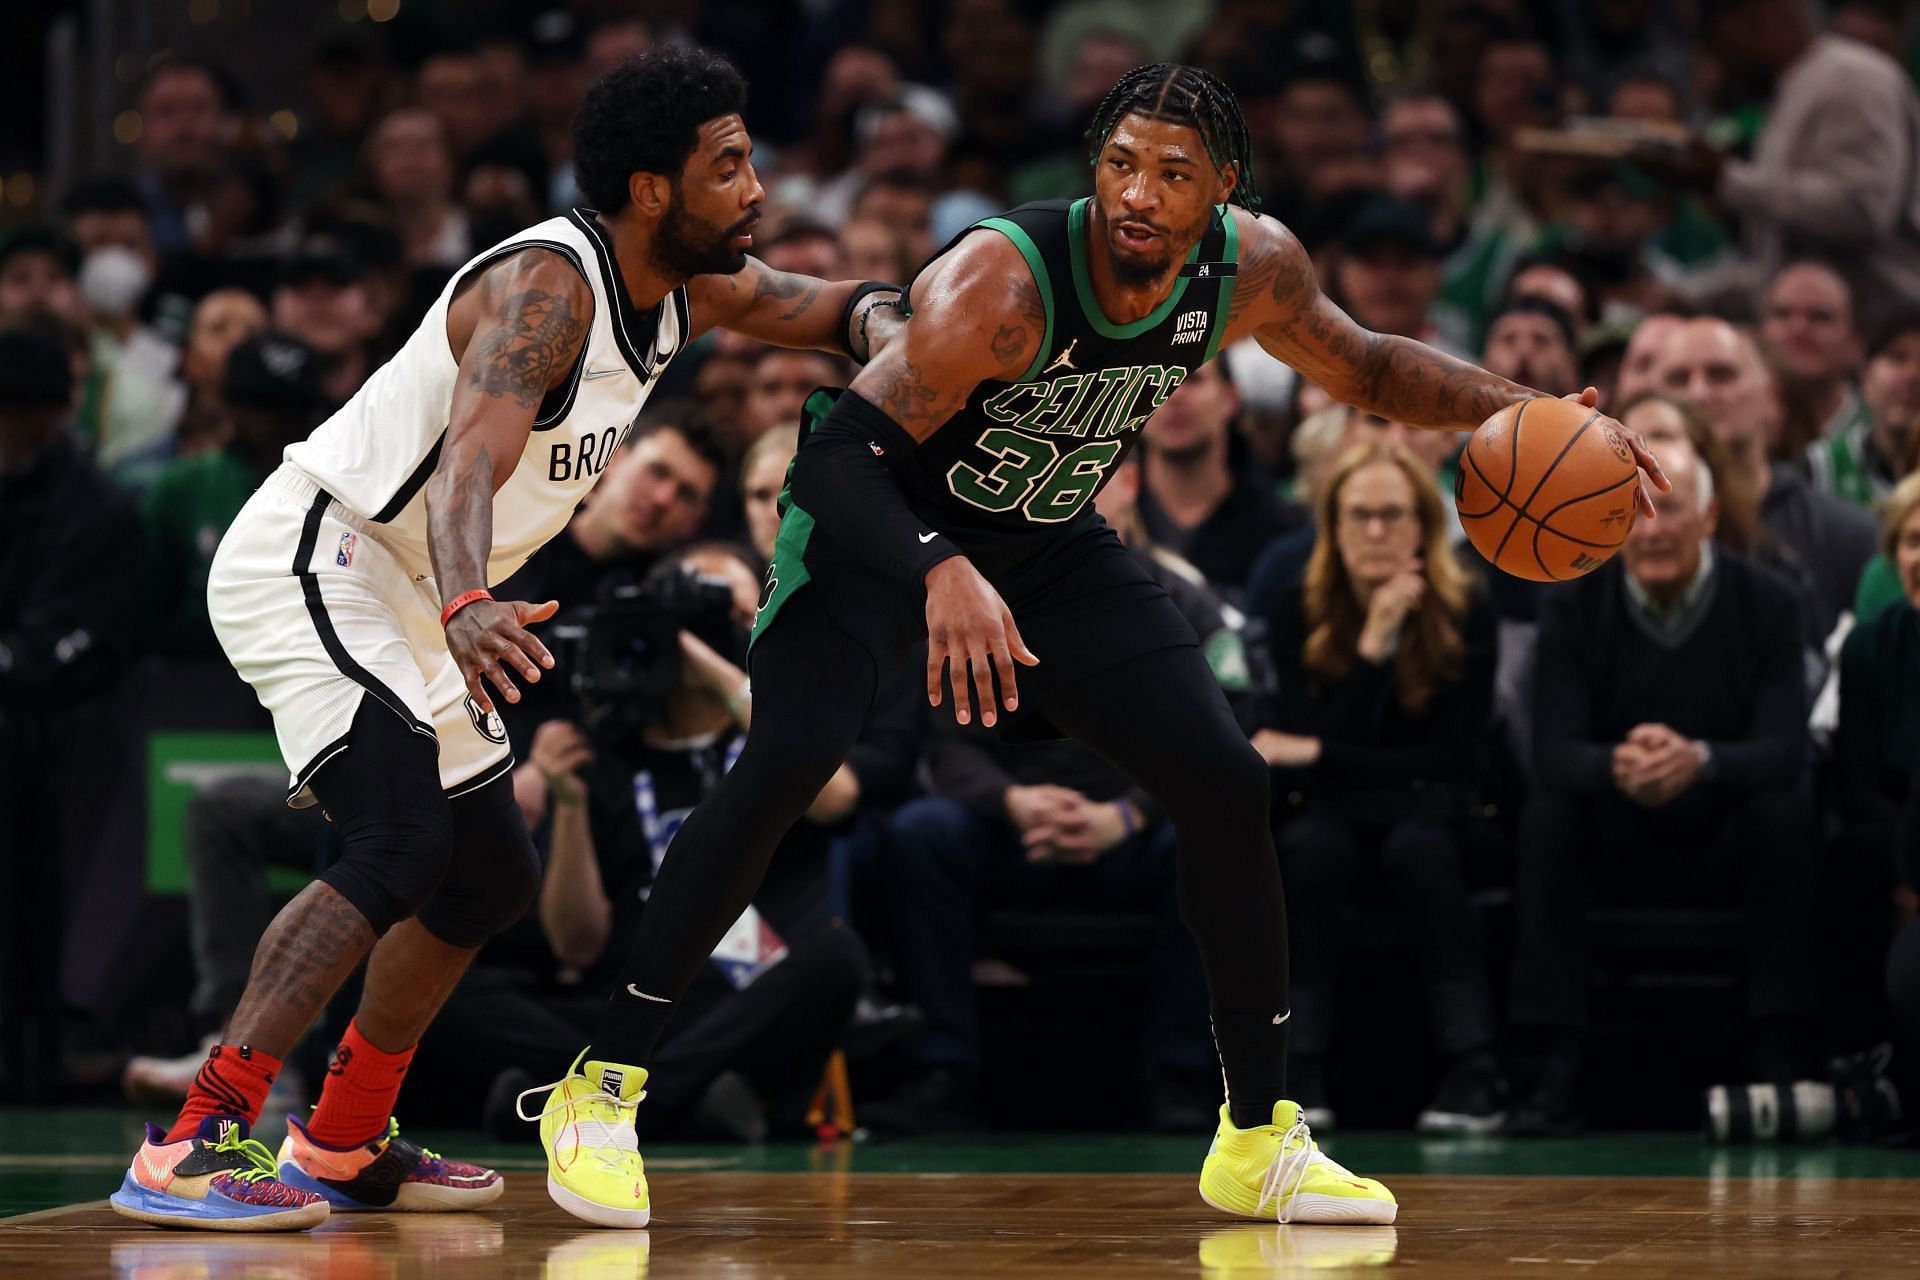 Marcus Smart in action against Kyrie Irving and the Brooklyn Nets.